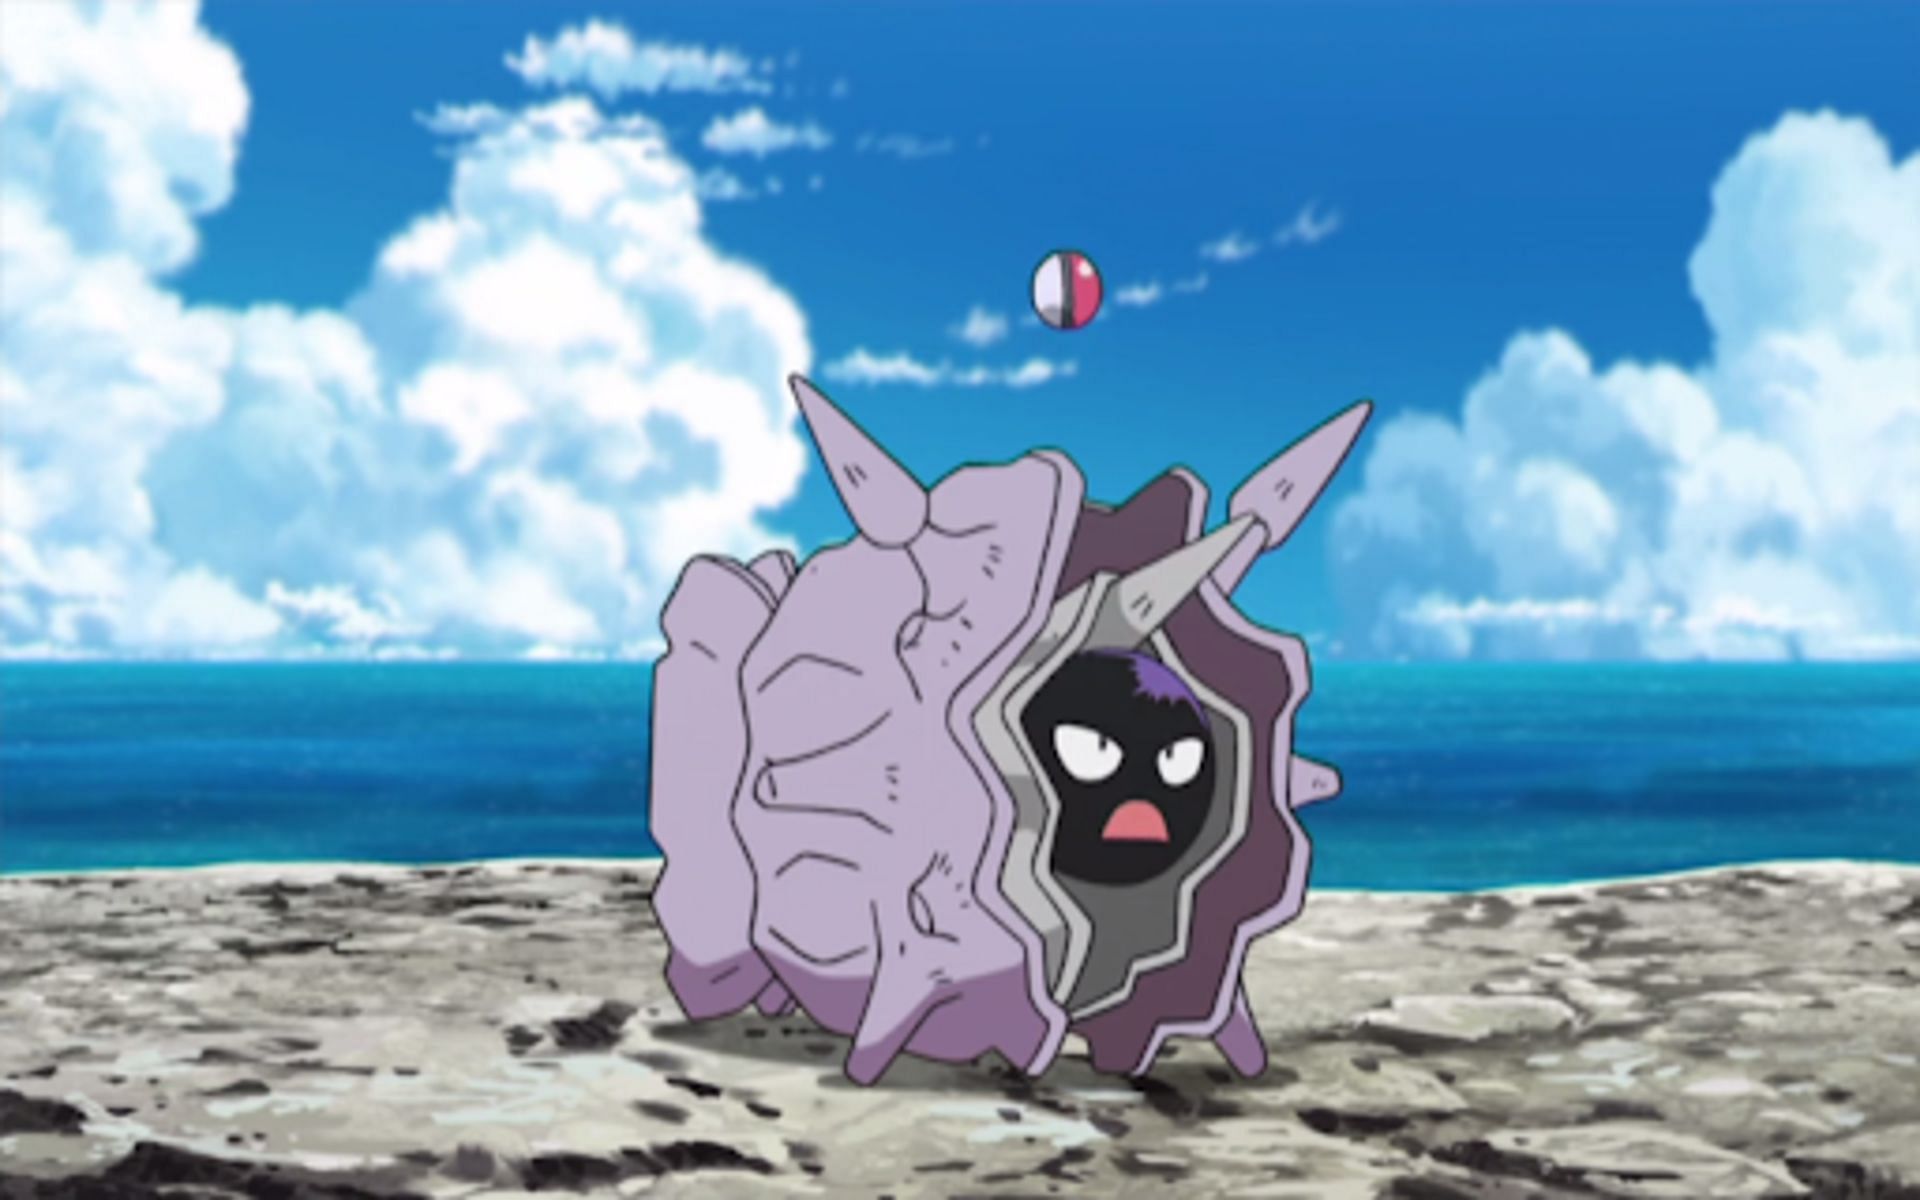 A Cloyster with Skill Link can take out Garchomp in one move (Image via The Pokemon Company)